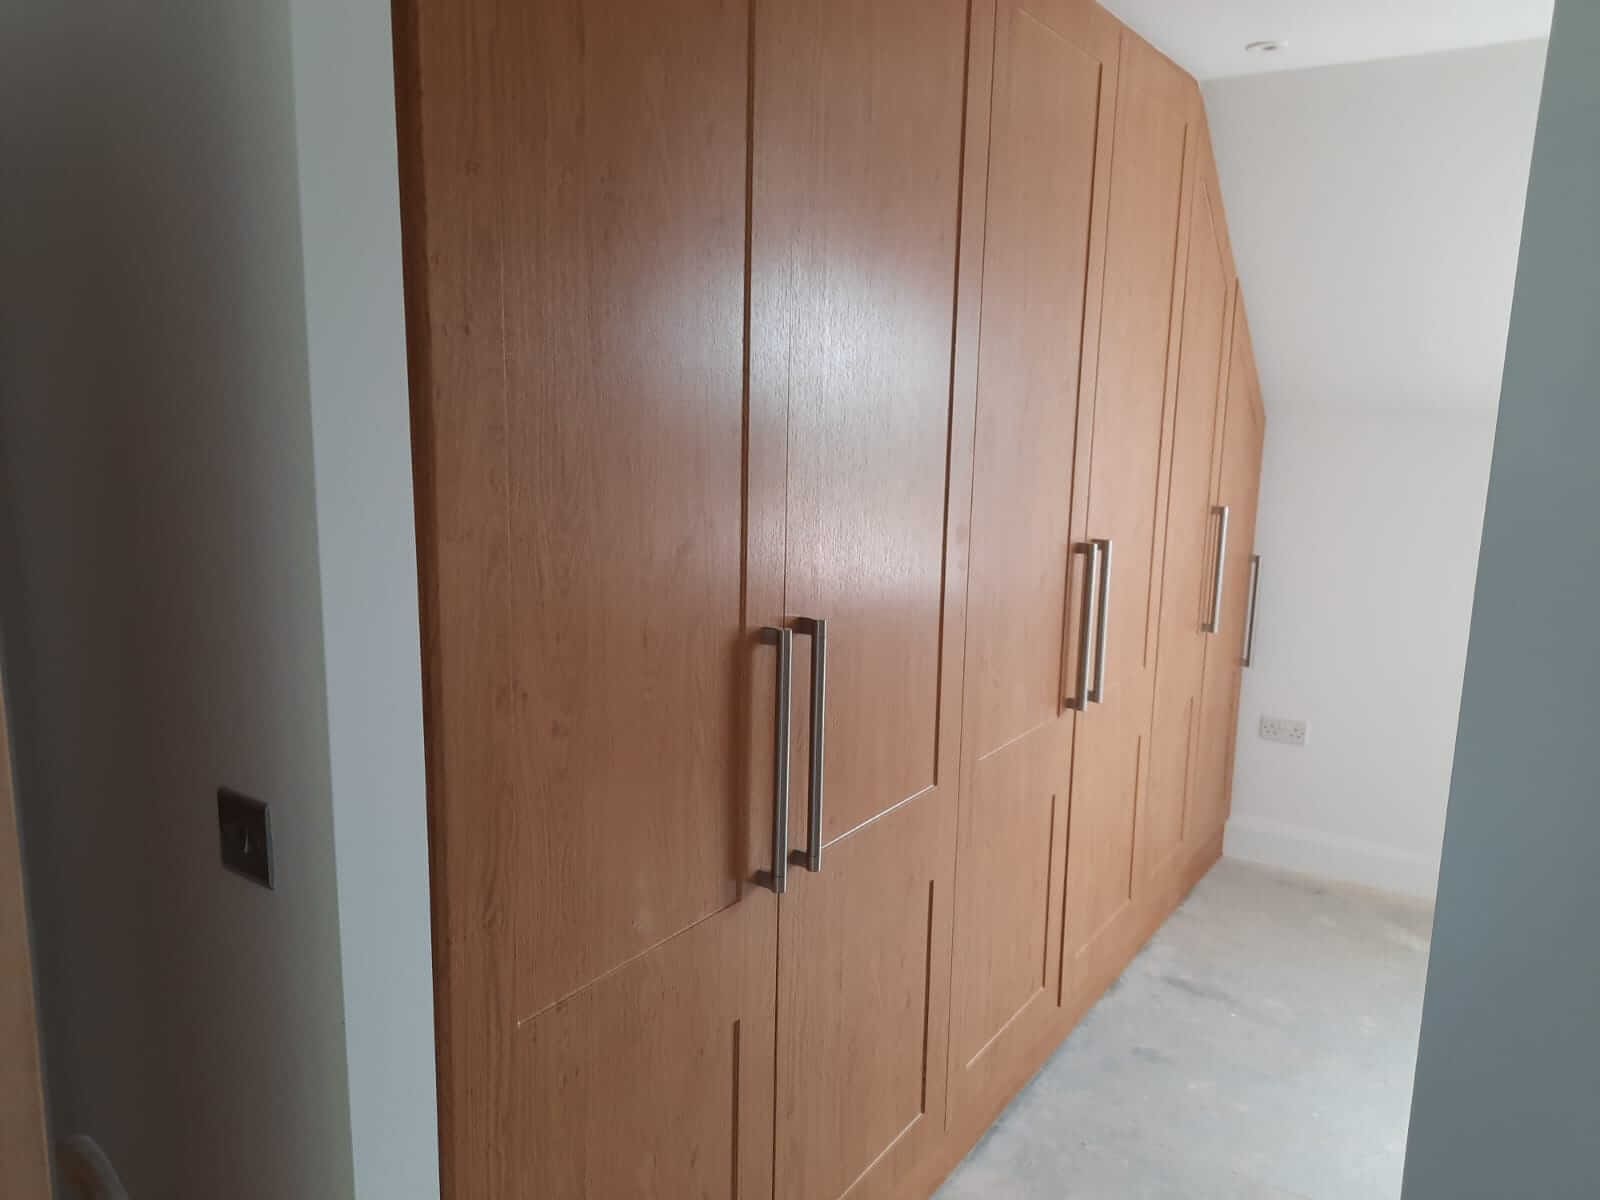 Bedroom Wardrobe in Dressing area showing Angled Ceiling Fit